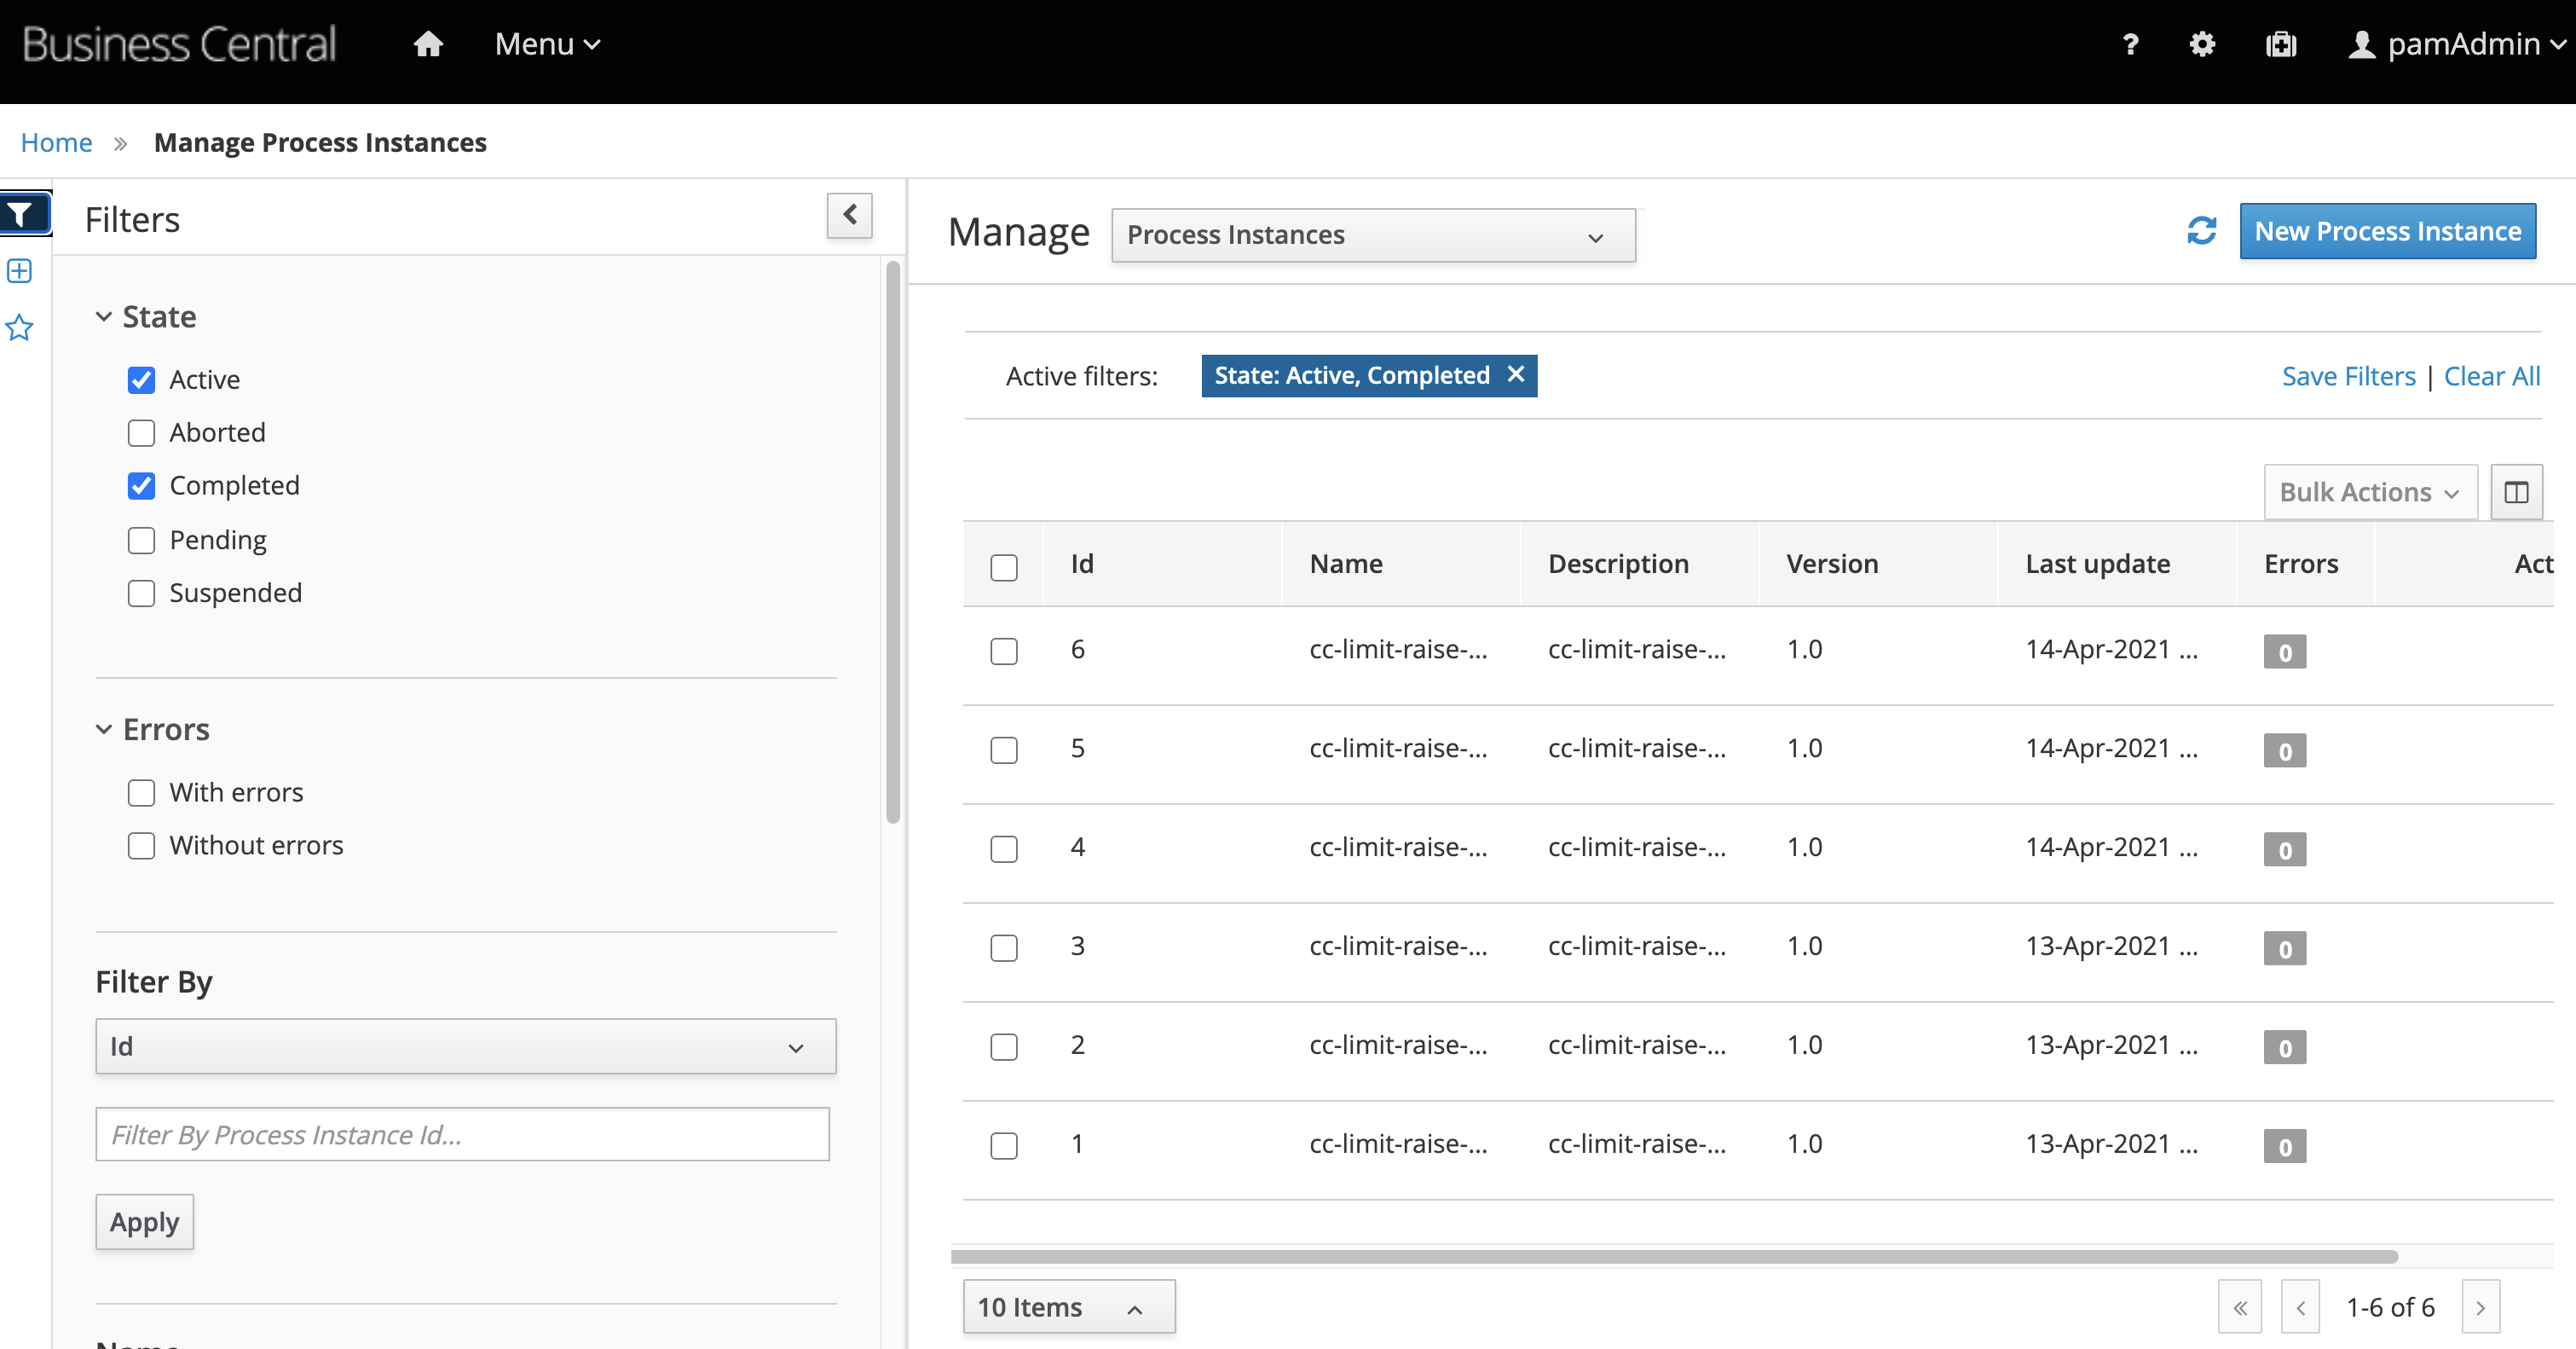 Filtered Process Instance View